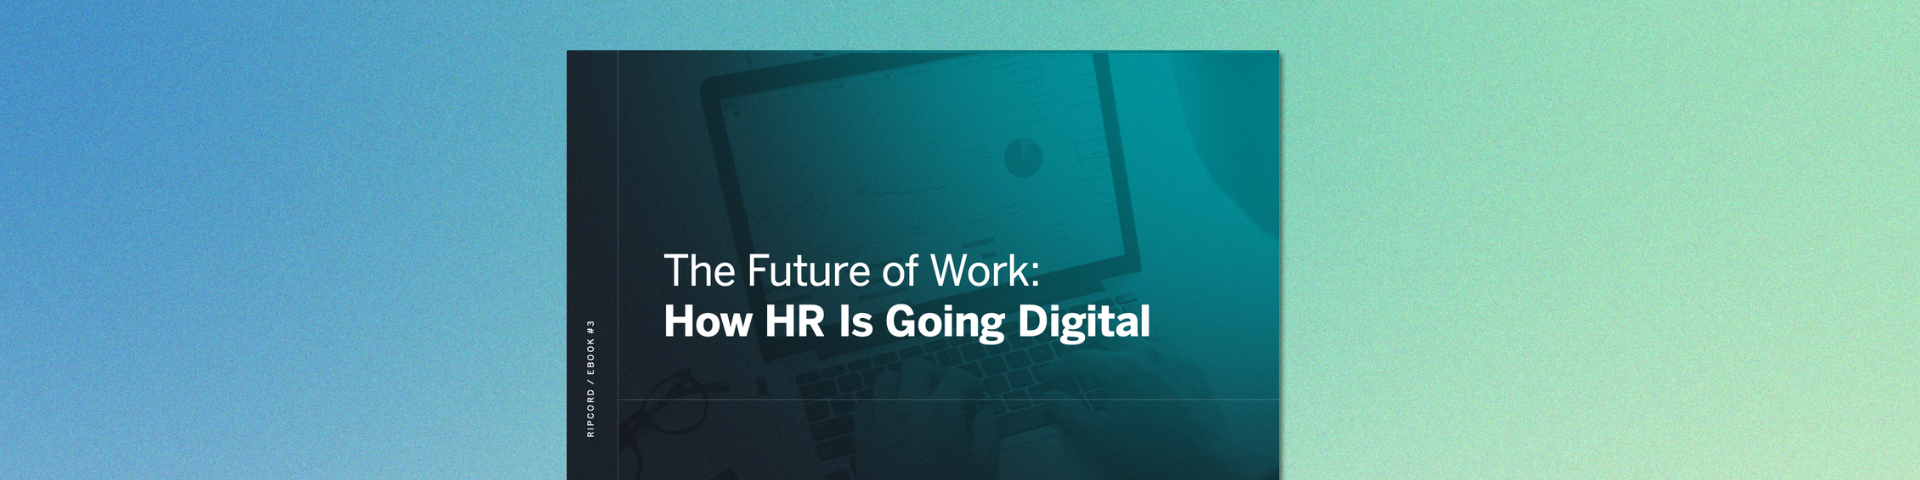 The Future of Work How HR Is Going Digital eBook - Ripcord - Ripcord